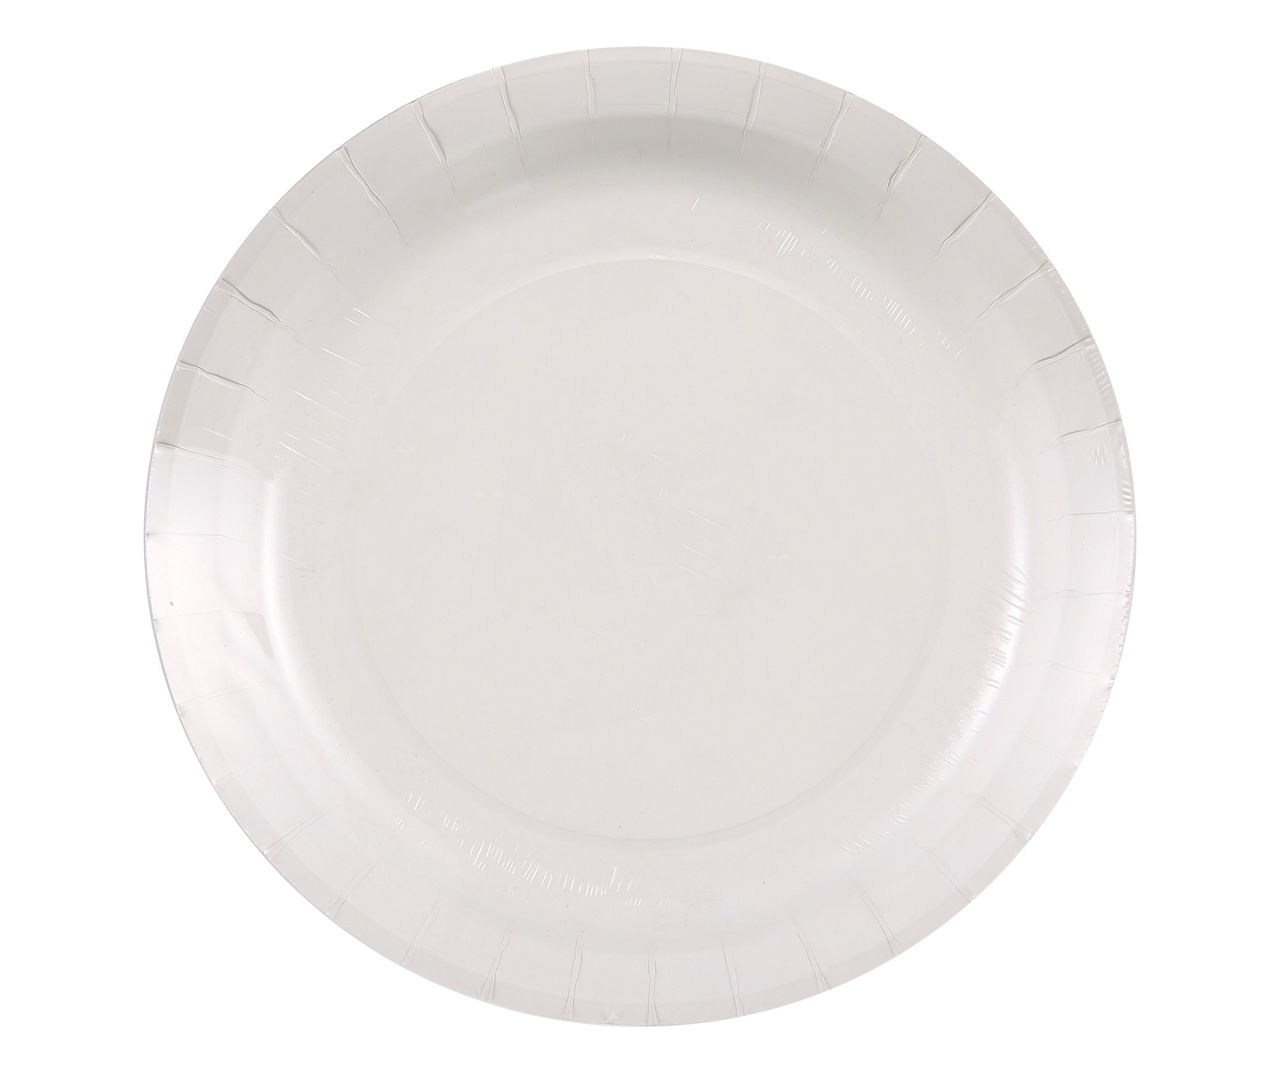 Kingsford 10 Stars Heavy Duty Paper Plates, 50-Count